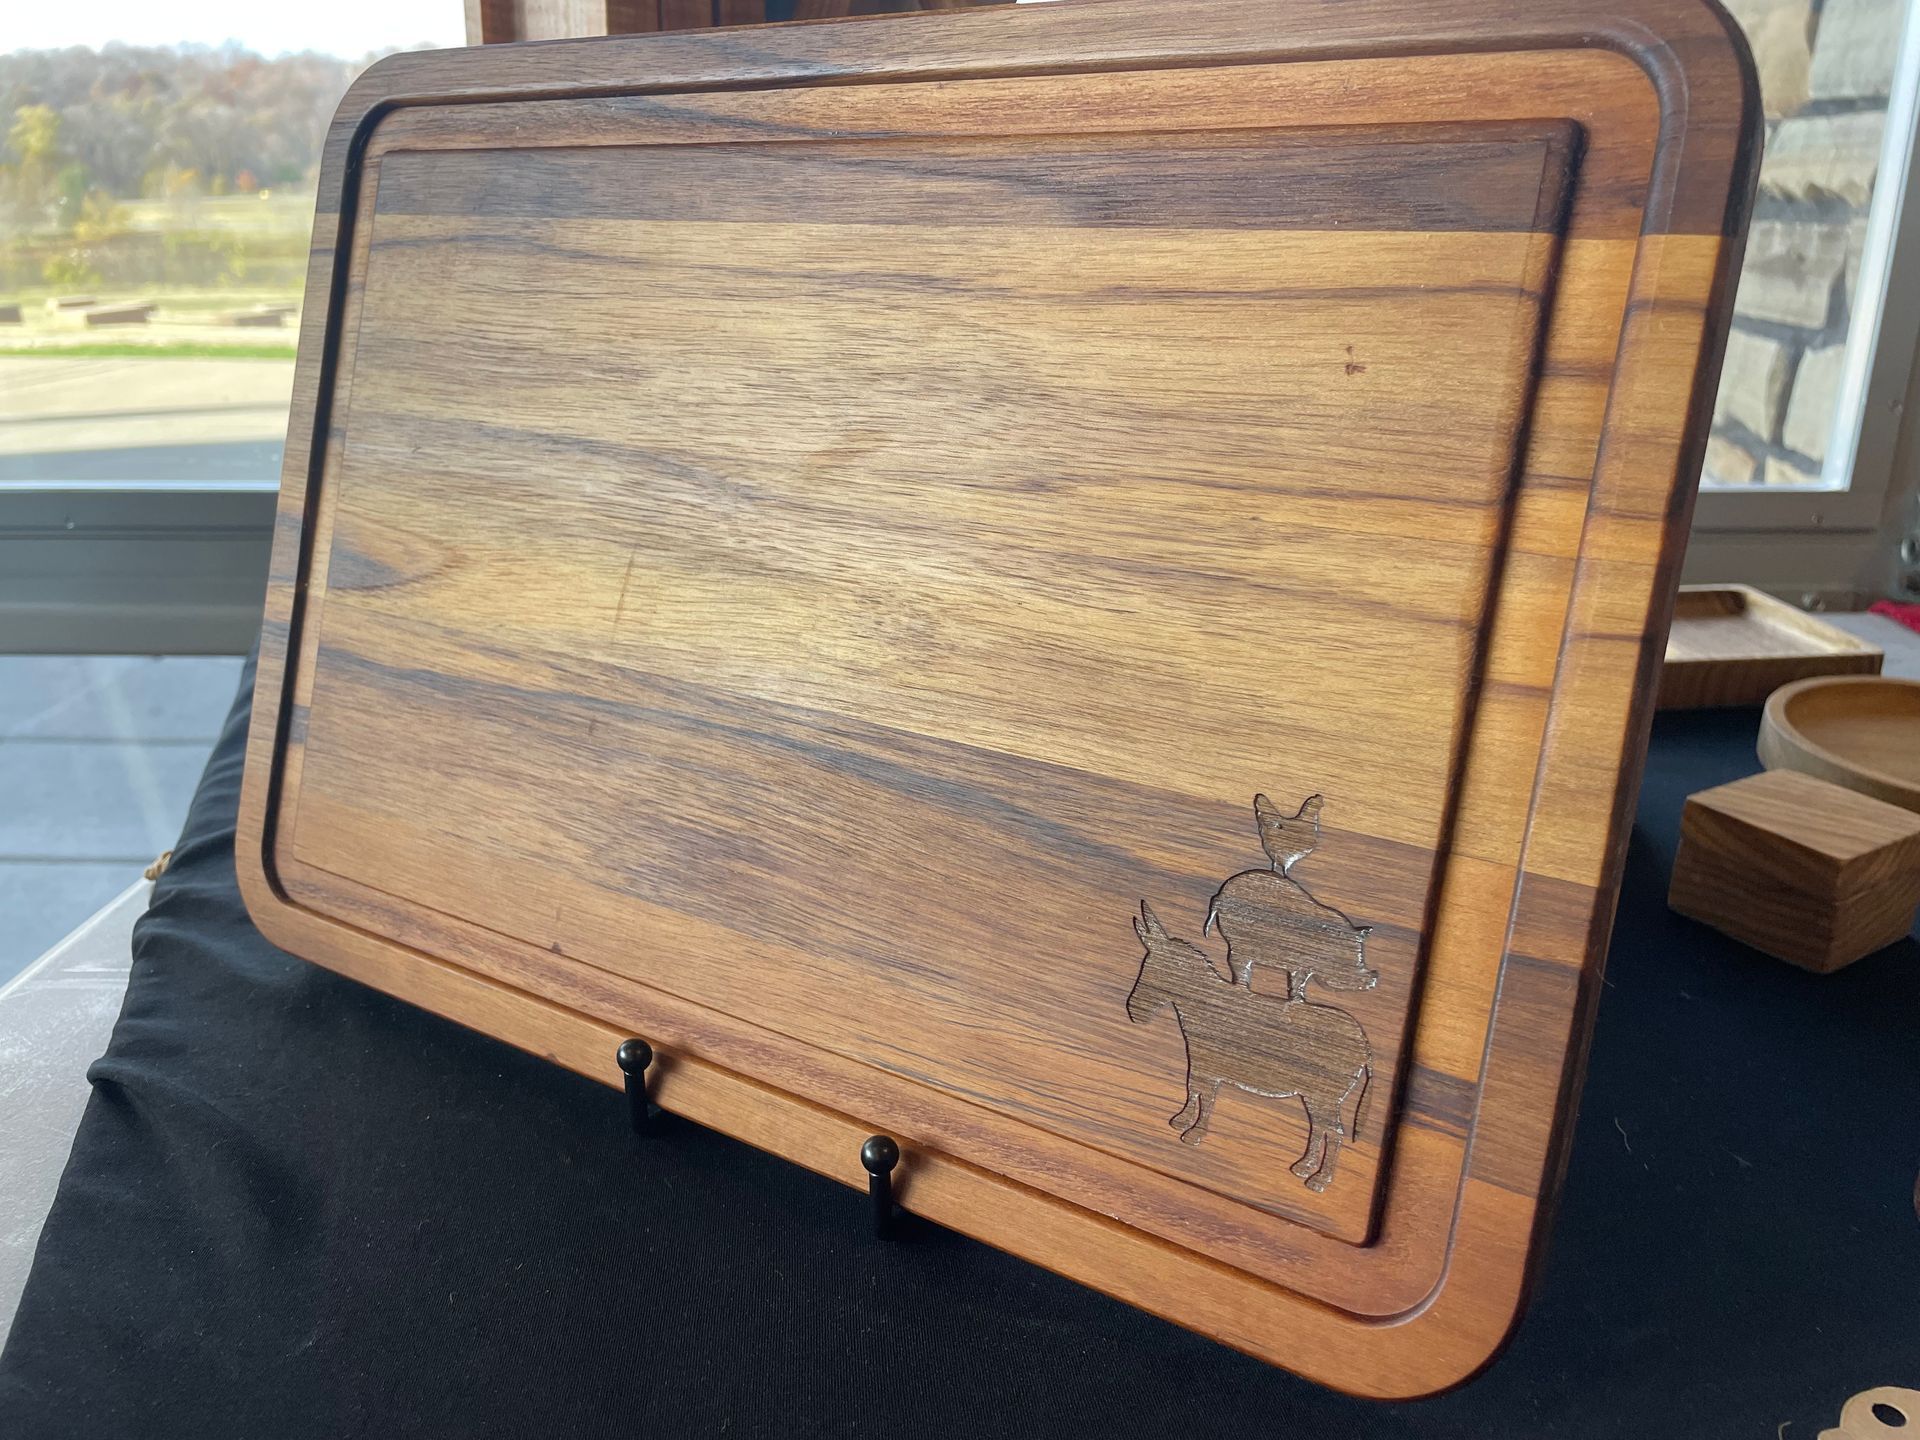 A wooden cutting board with a picture of a deer on it